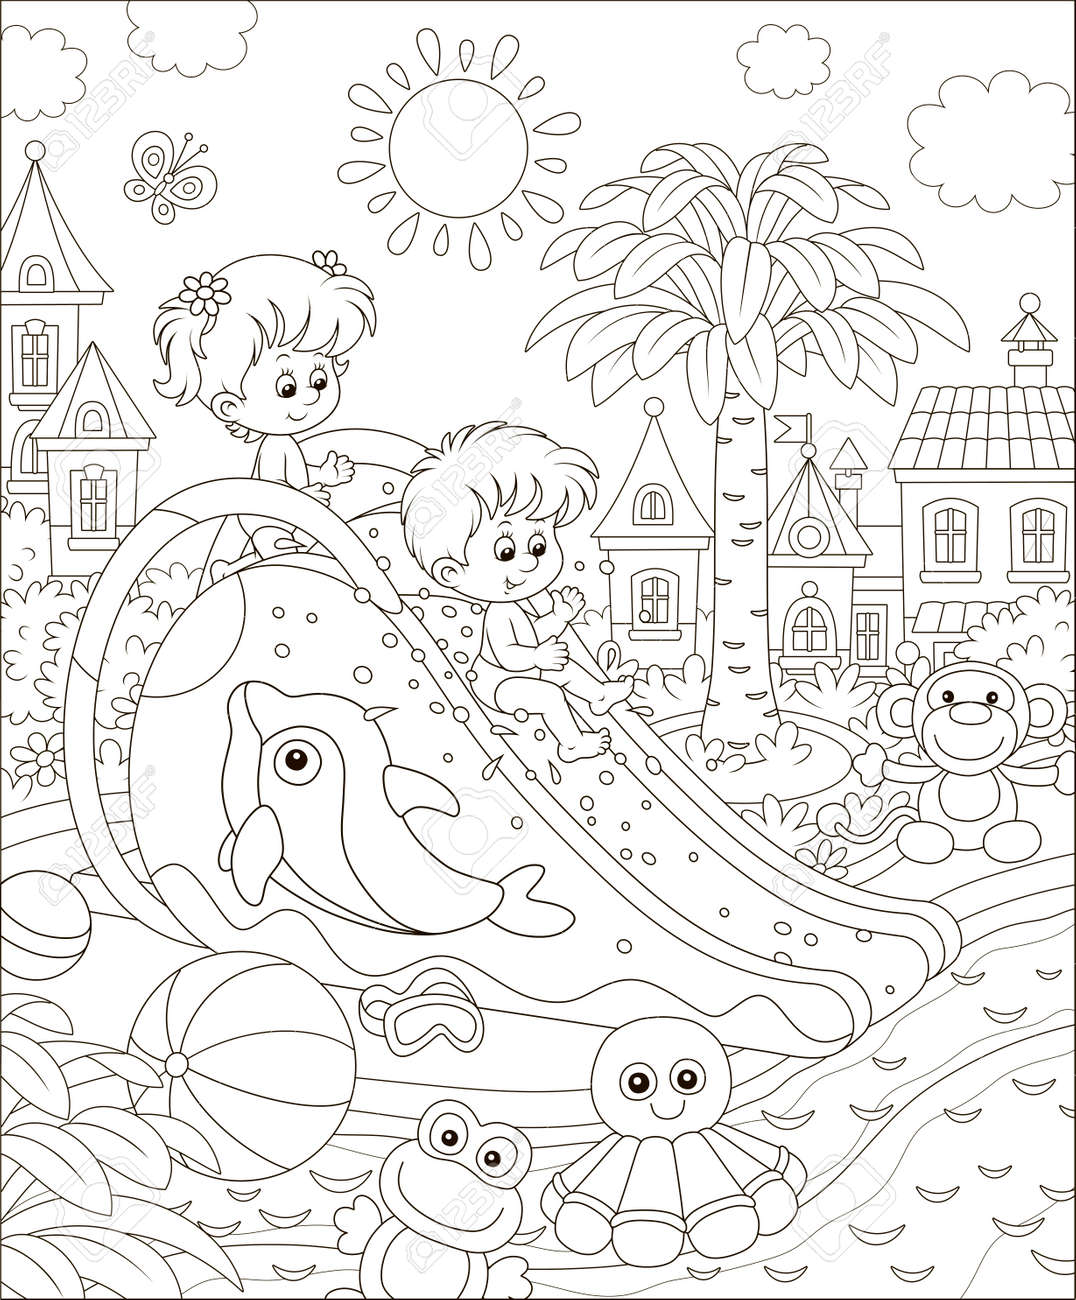 Small children sliding down from a waterslide in a summer aquapark black and white illustration in a cartoon style for a coloring book royalty free svg cliparts vectors and stock illustration image